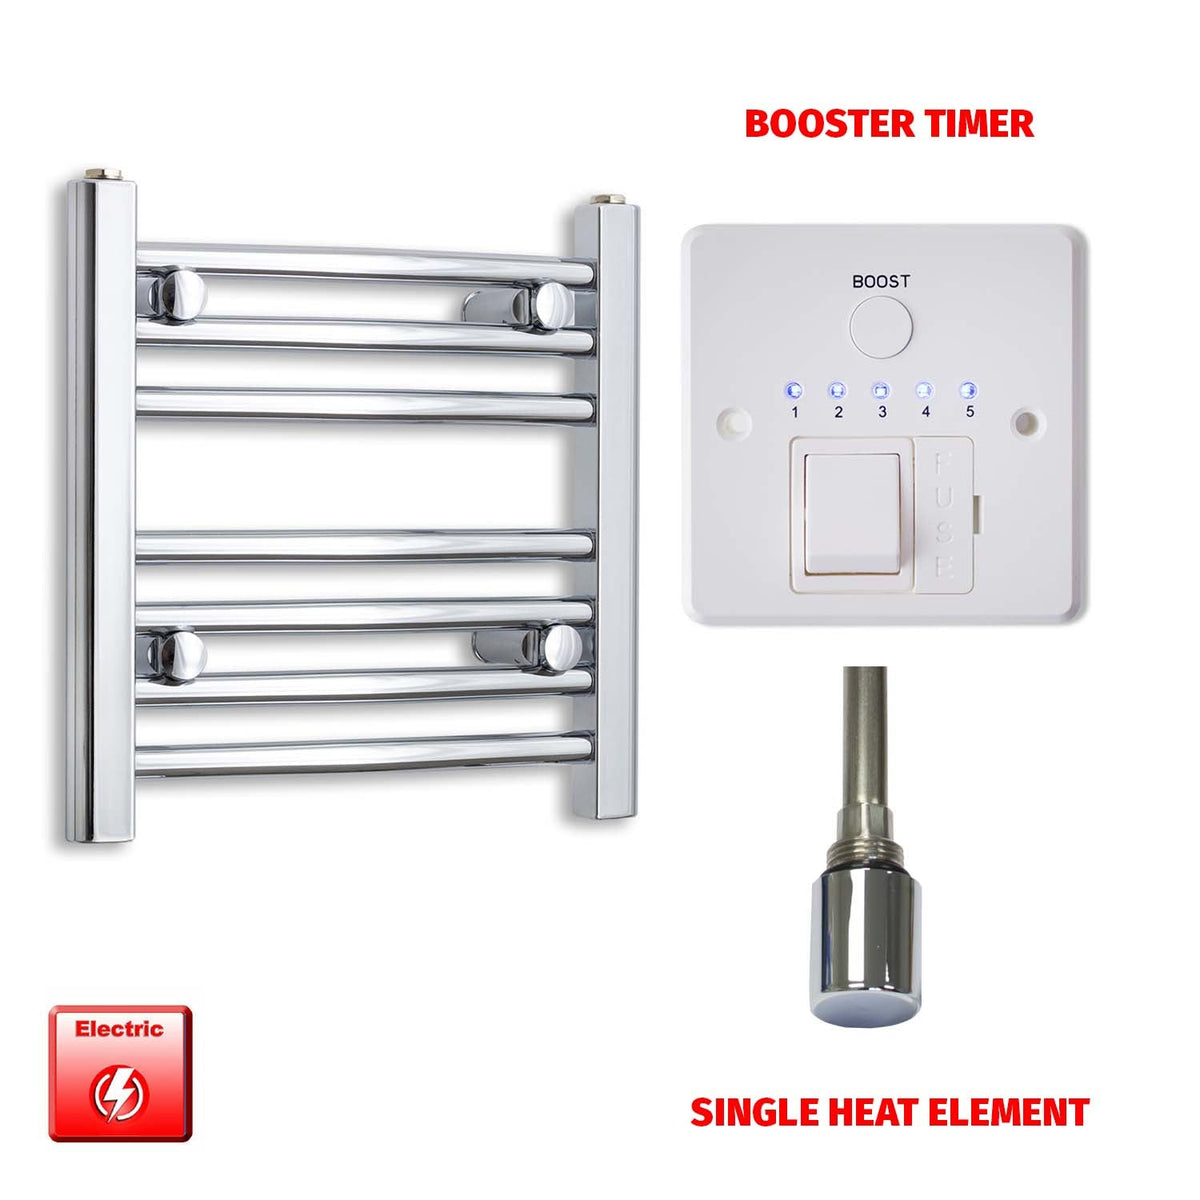 400 x 450 Pre-Filled Electric Heated Towel Radiator Straight Chrome Single heat element Booster timer